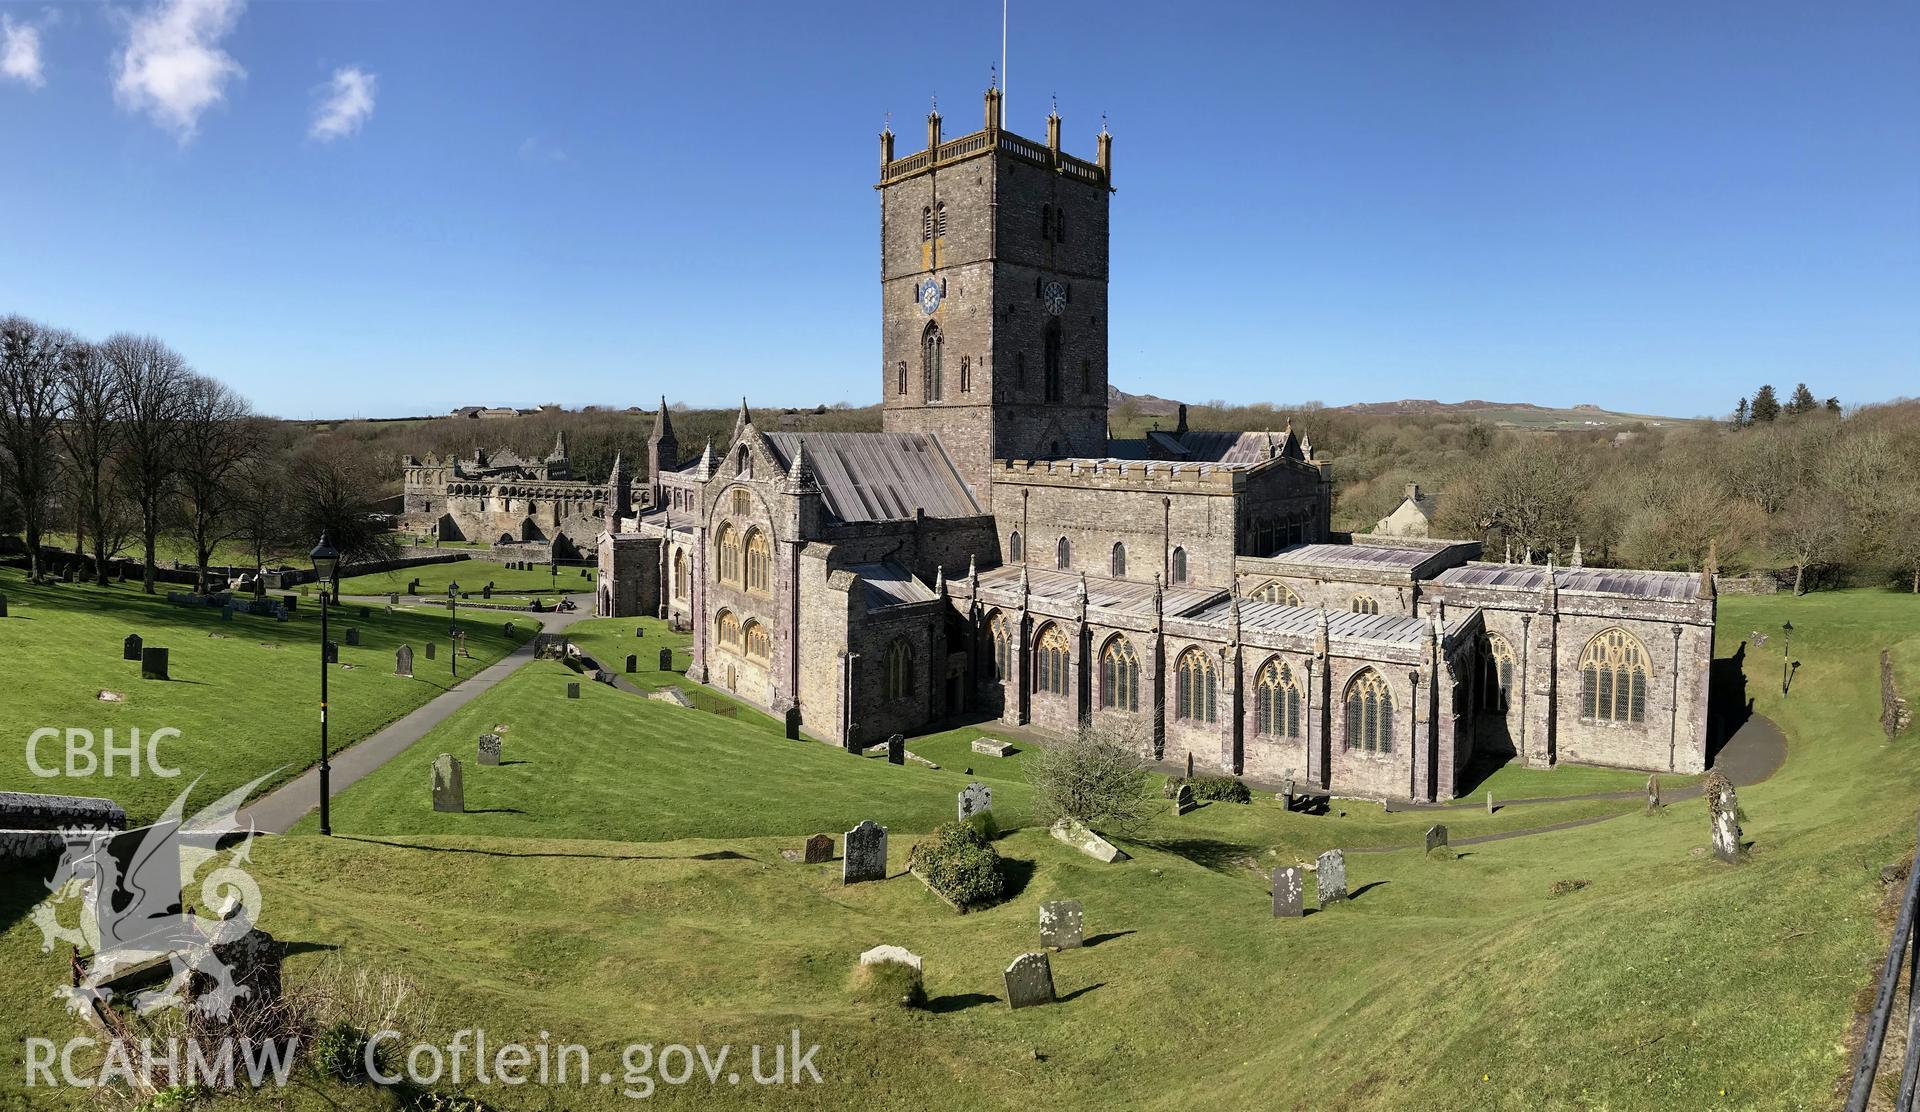 Colour photo showing view of St David's Cathedral, taken by Paul R. Davis, 2018.